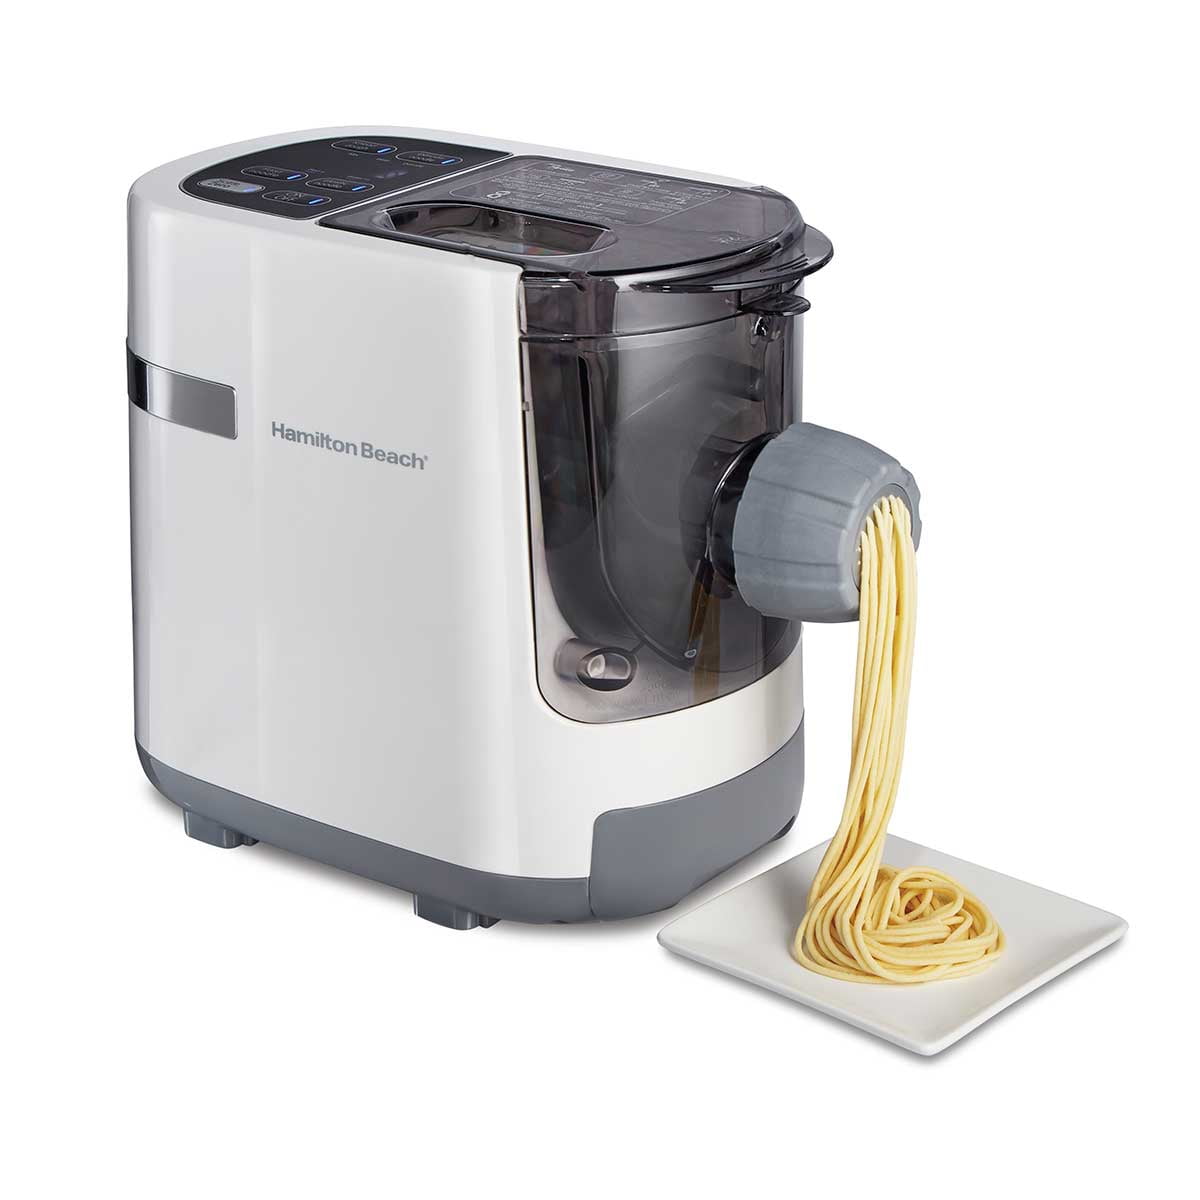 Emeril Lagasse Pasta & Beyond, Automatic Pasta and Noodle Maker 